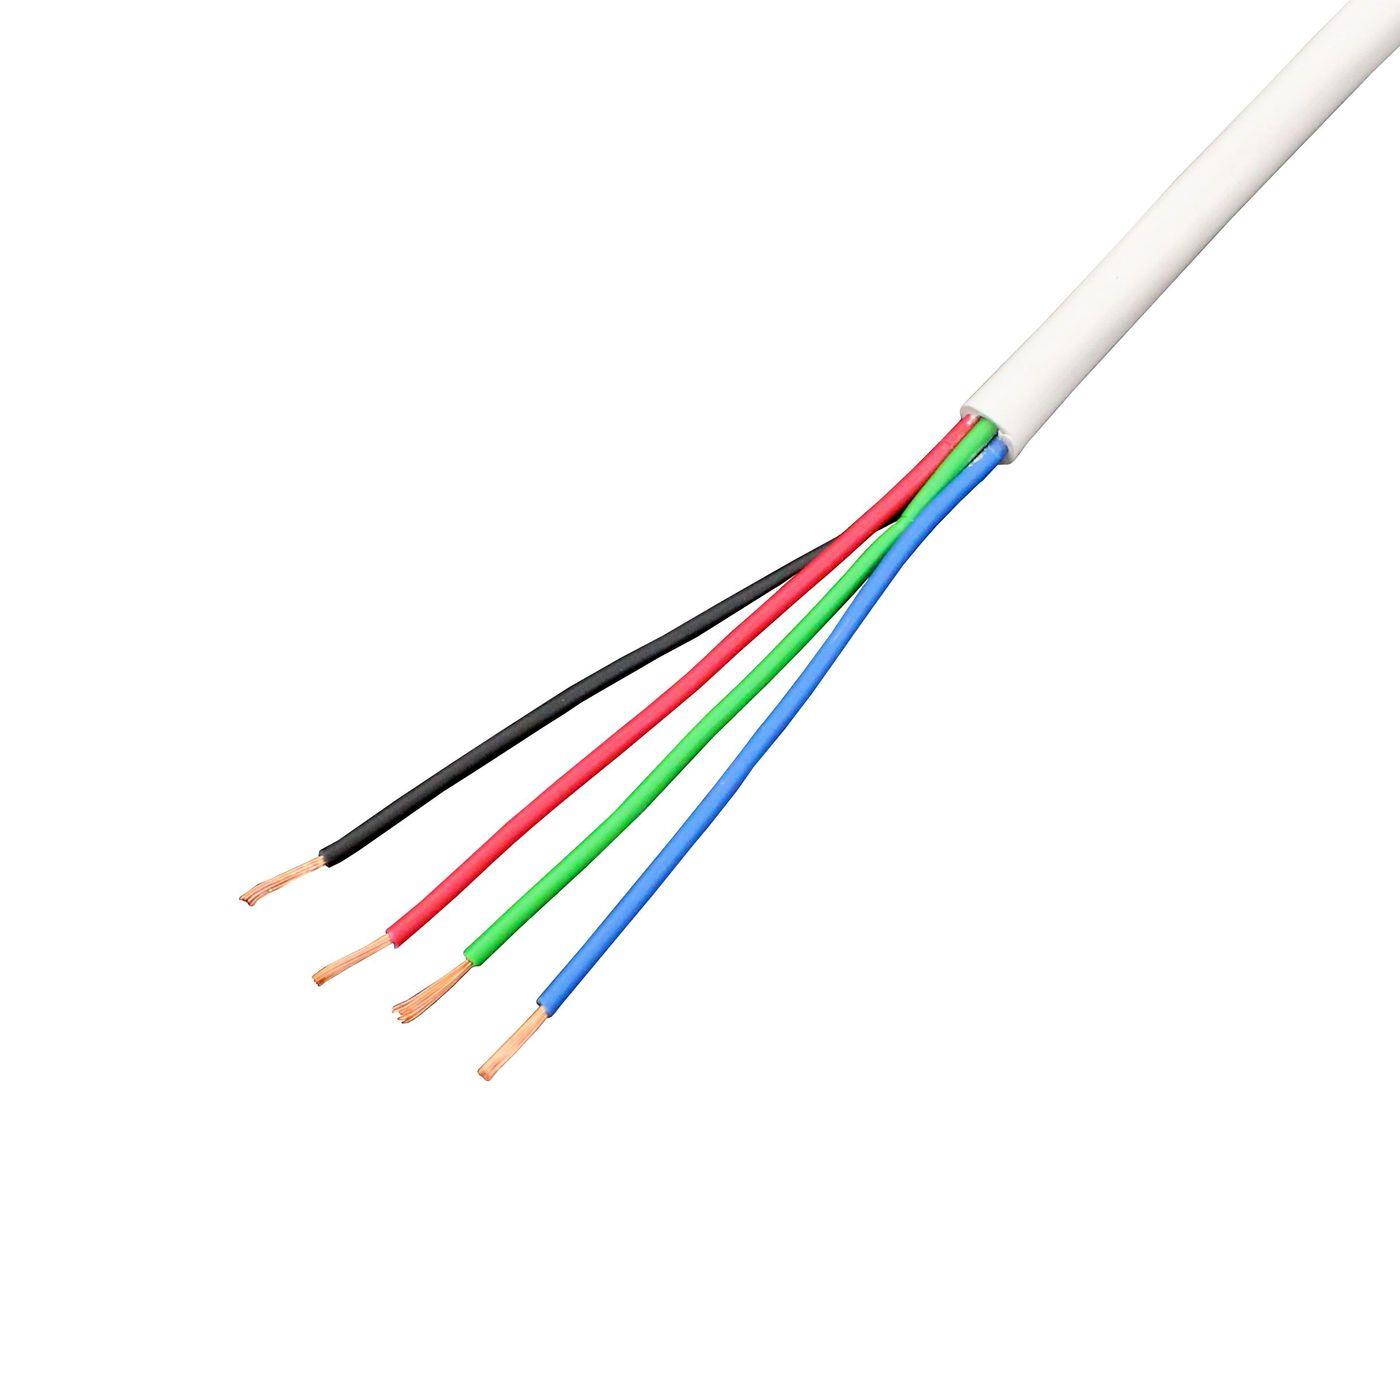 1m RGB LED Control cable 4x 0,34mm² LiYY Extension 4 wire Power cable white